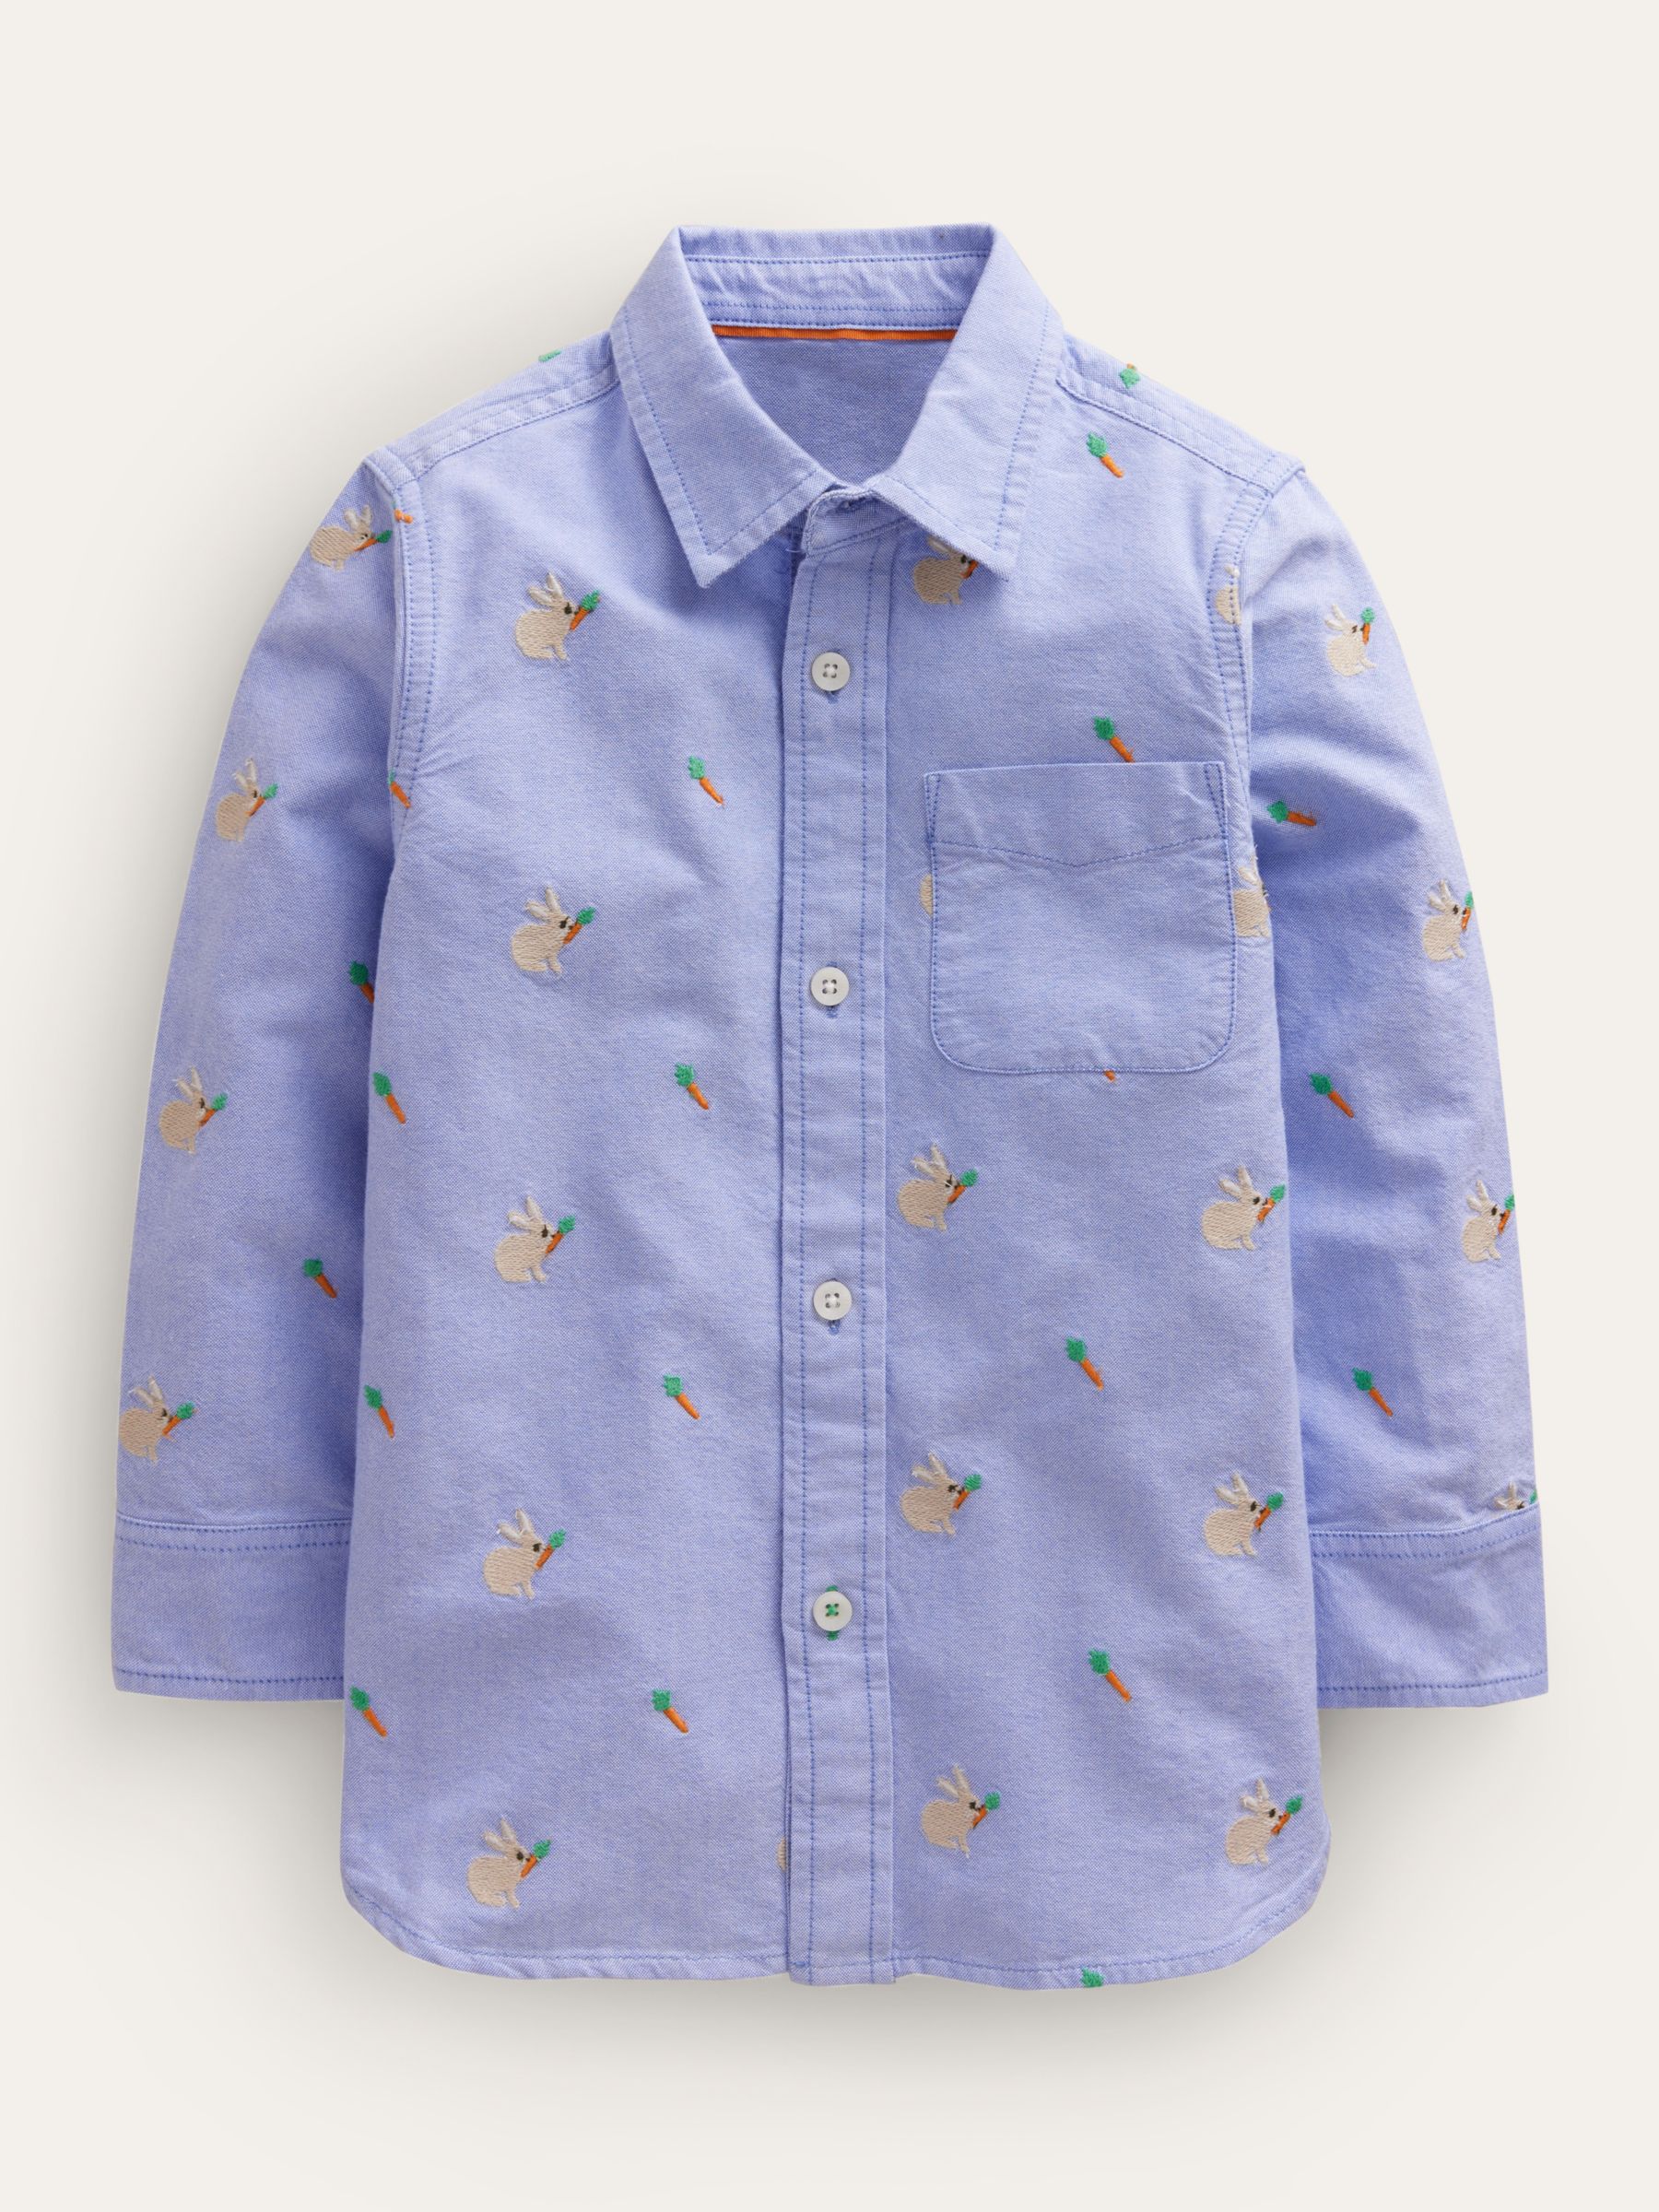 Mini Boden Kids' Embroidered Bunny Oxford Shirt, Blue, 3-4 years